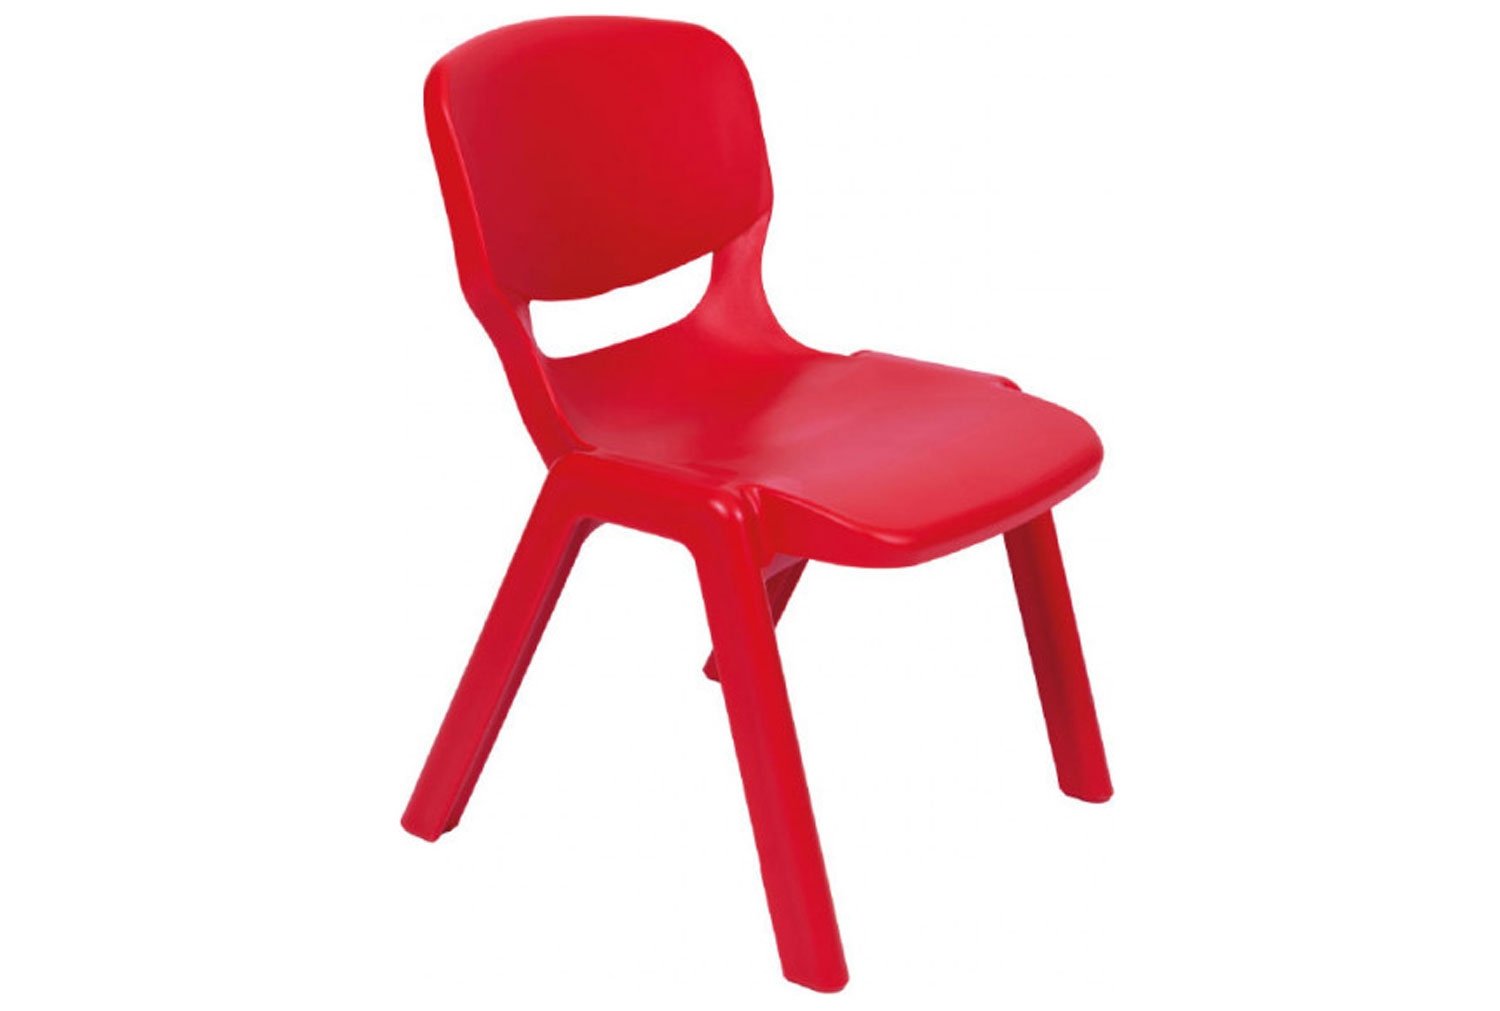 Qty 6 - Ergos Classroom Chairs, 14-16 Years - 50wx50dx46h (cm), Bright Red